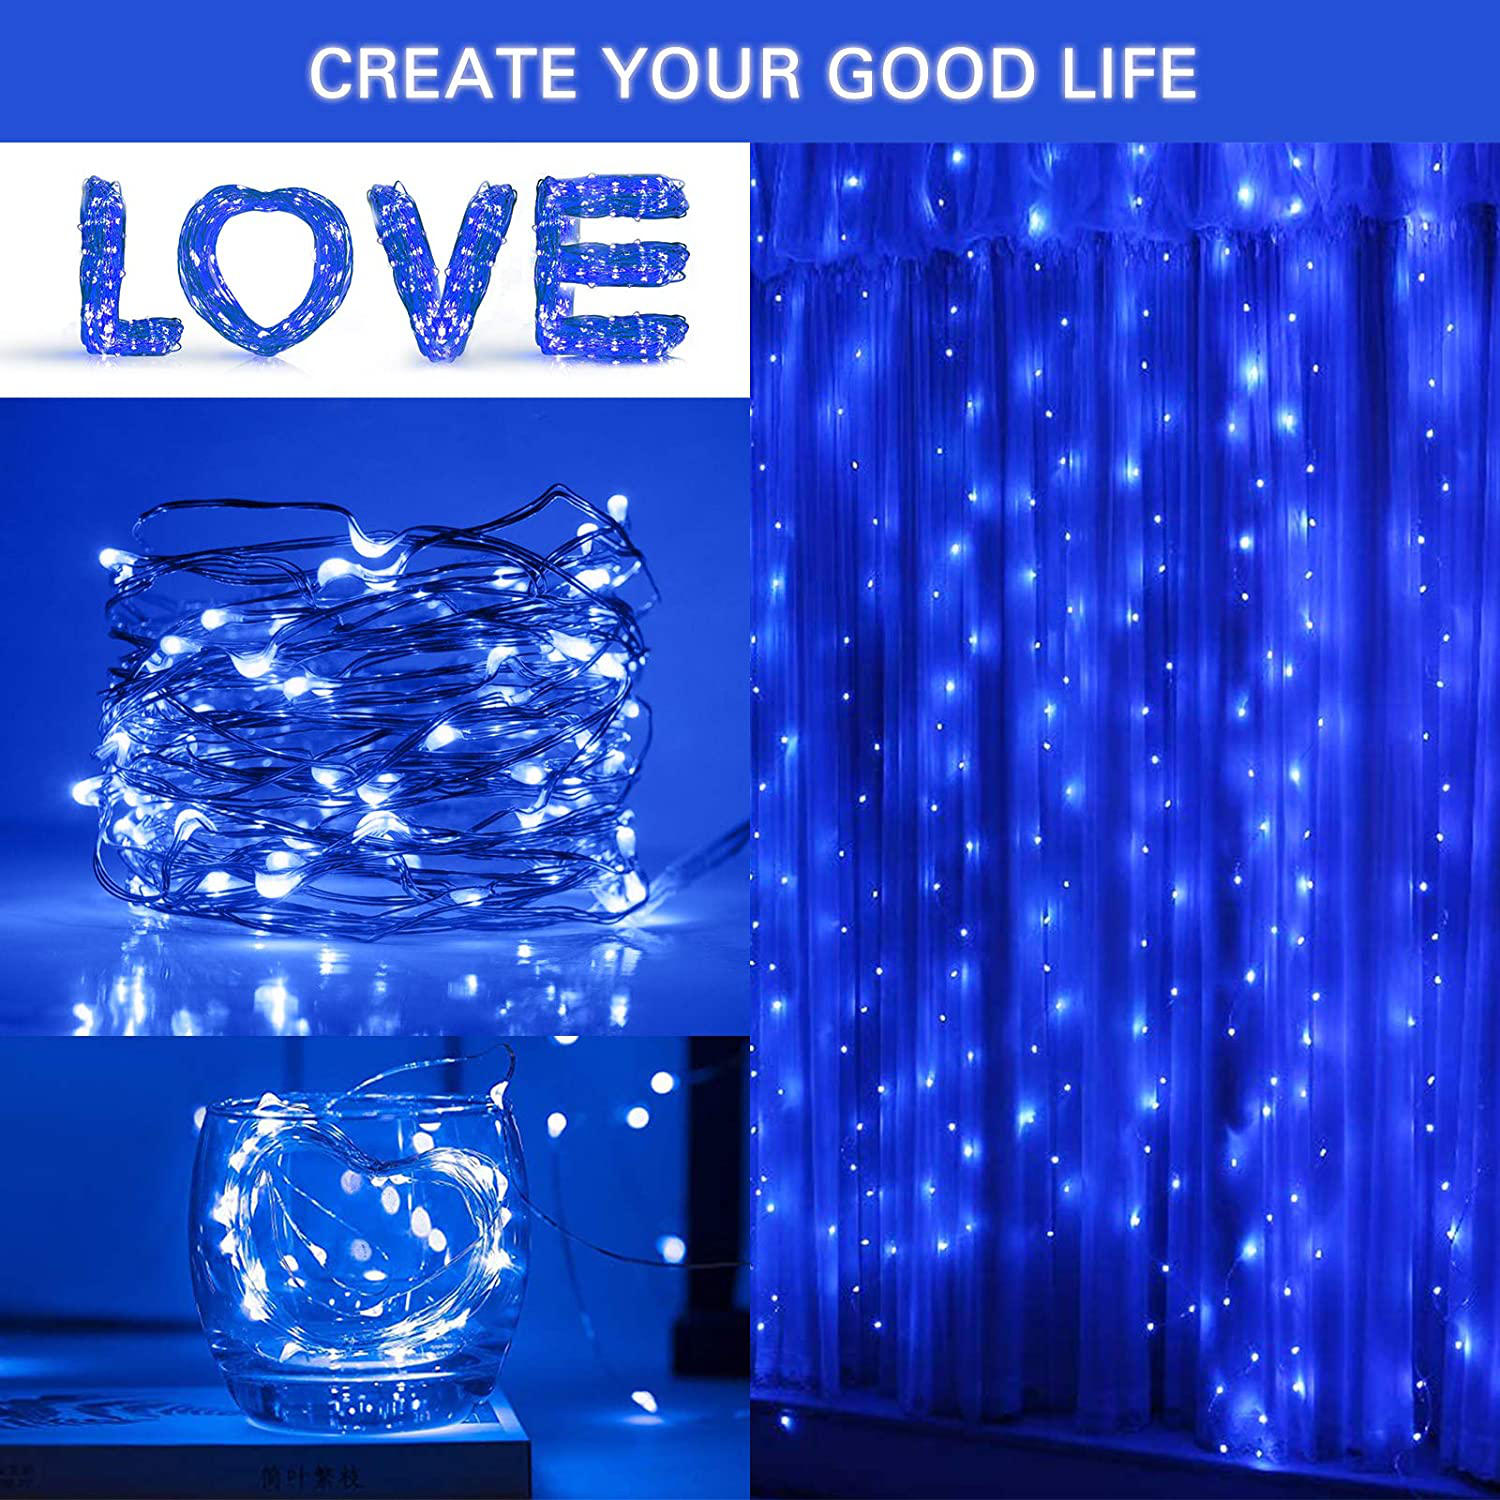 SUNNEST Curtain String Light, 300 LED String Lights with 8 Lighting Modes, USB Powered Dimmable Hanging Lights with Remote for Indoor/Outdoor Wall Decoration (9.8FT x 9.8FT)